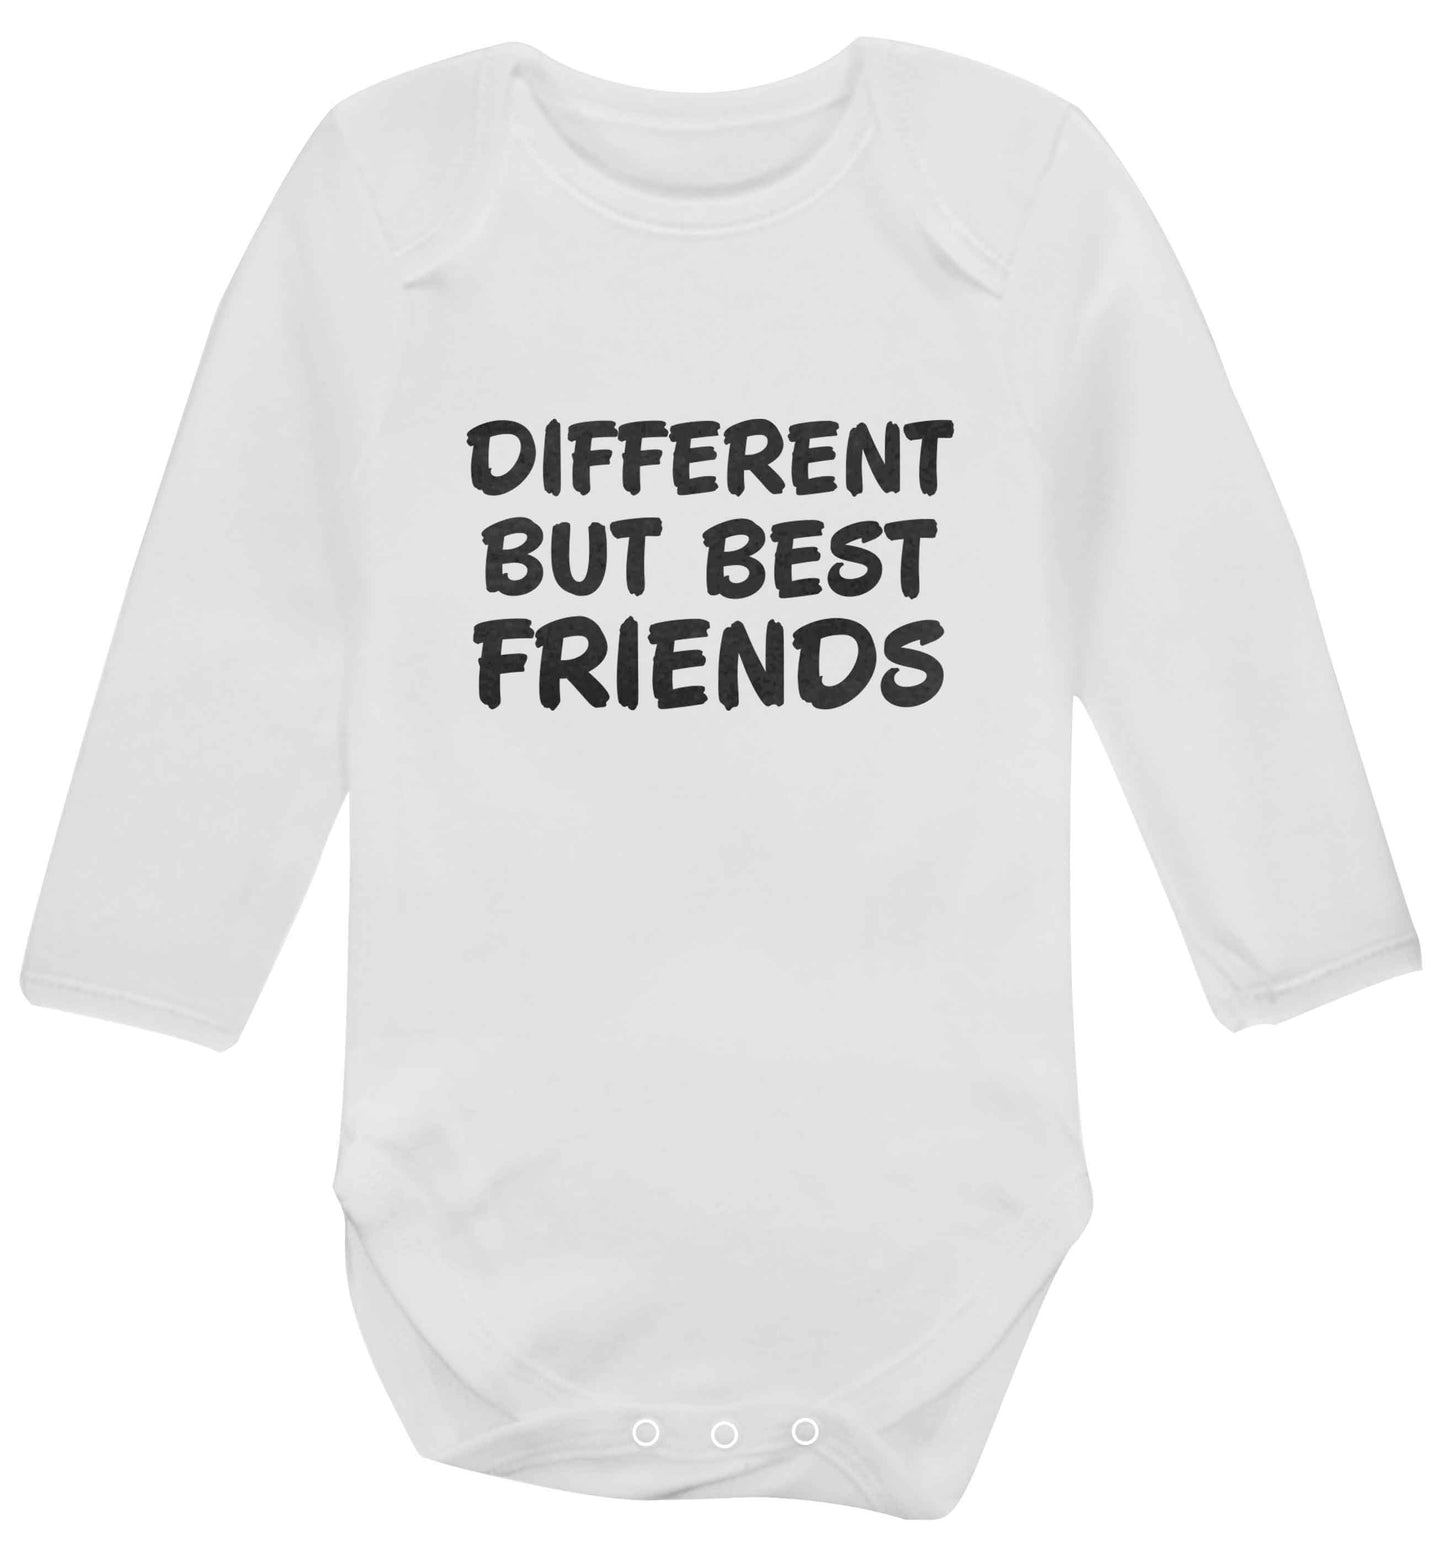 Different but best friends baby vest long sleeved white 6-12 months